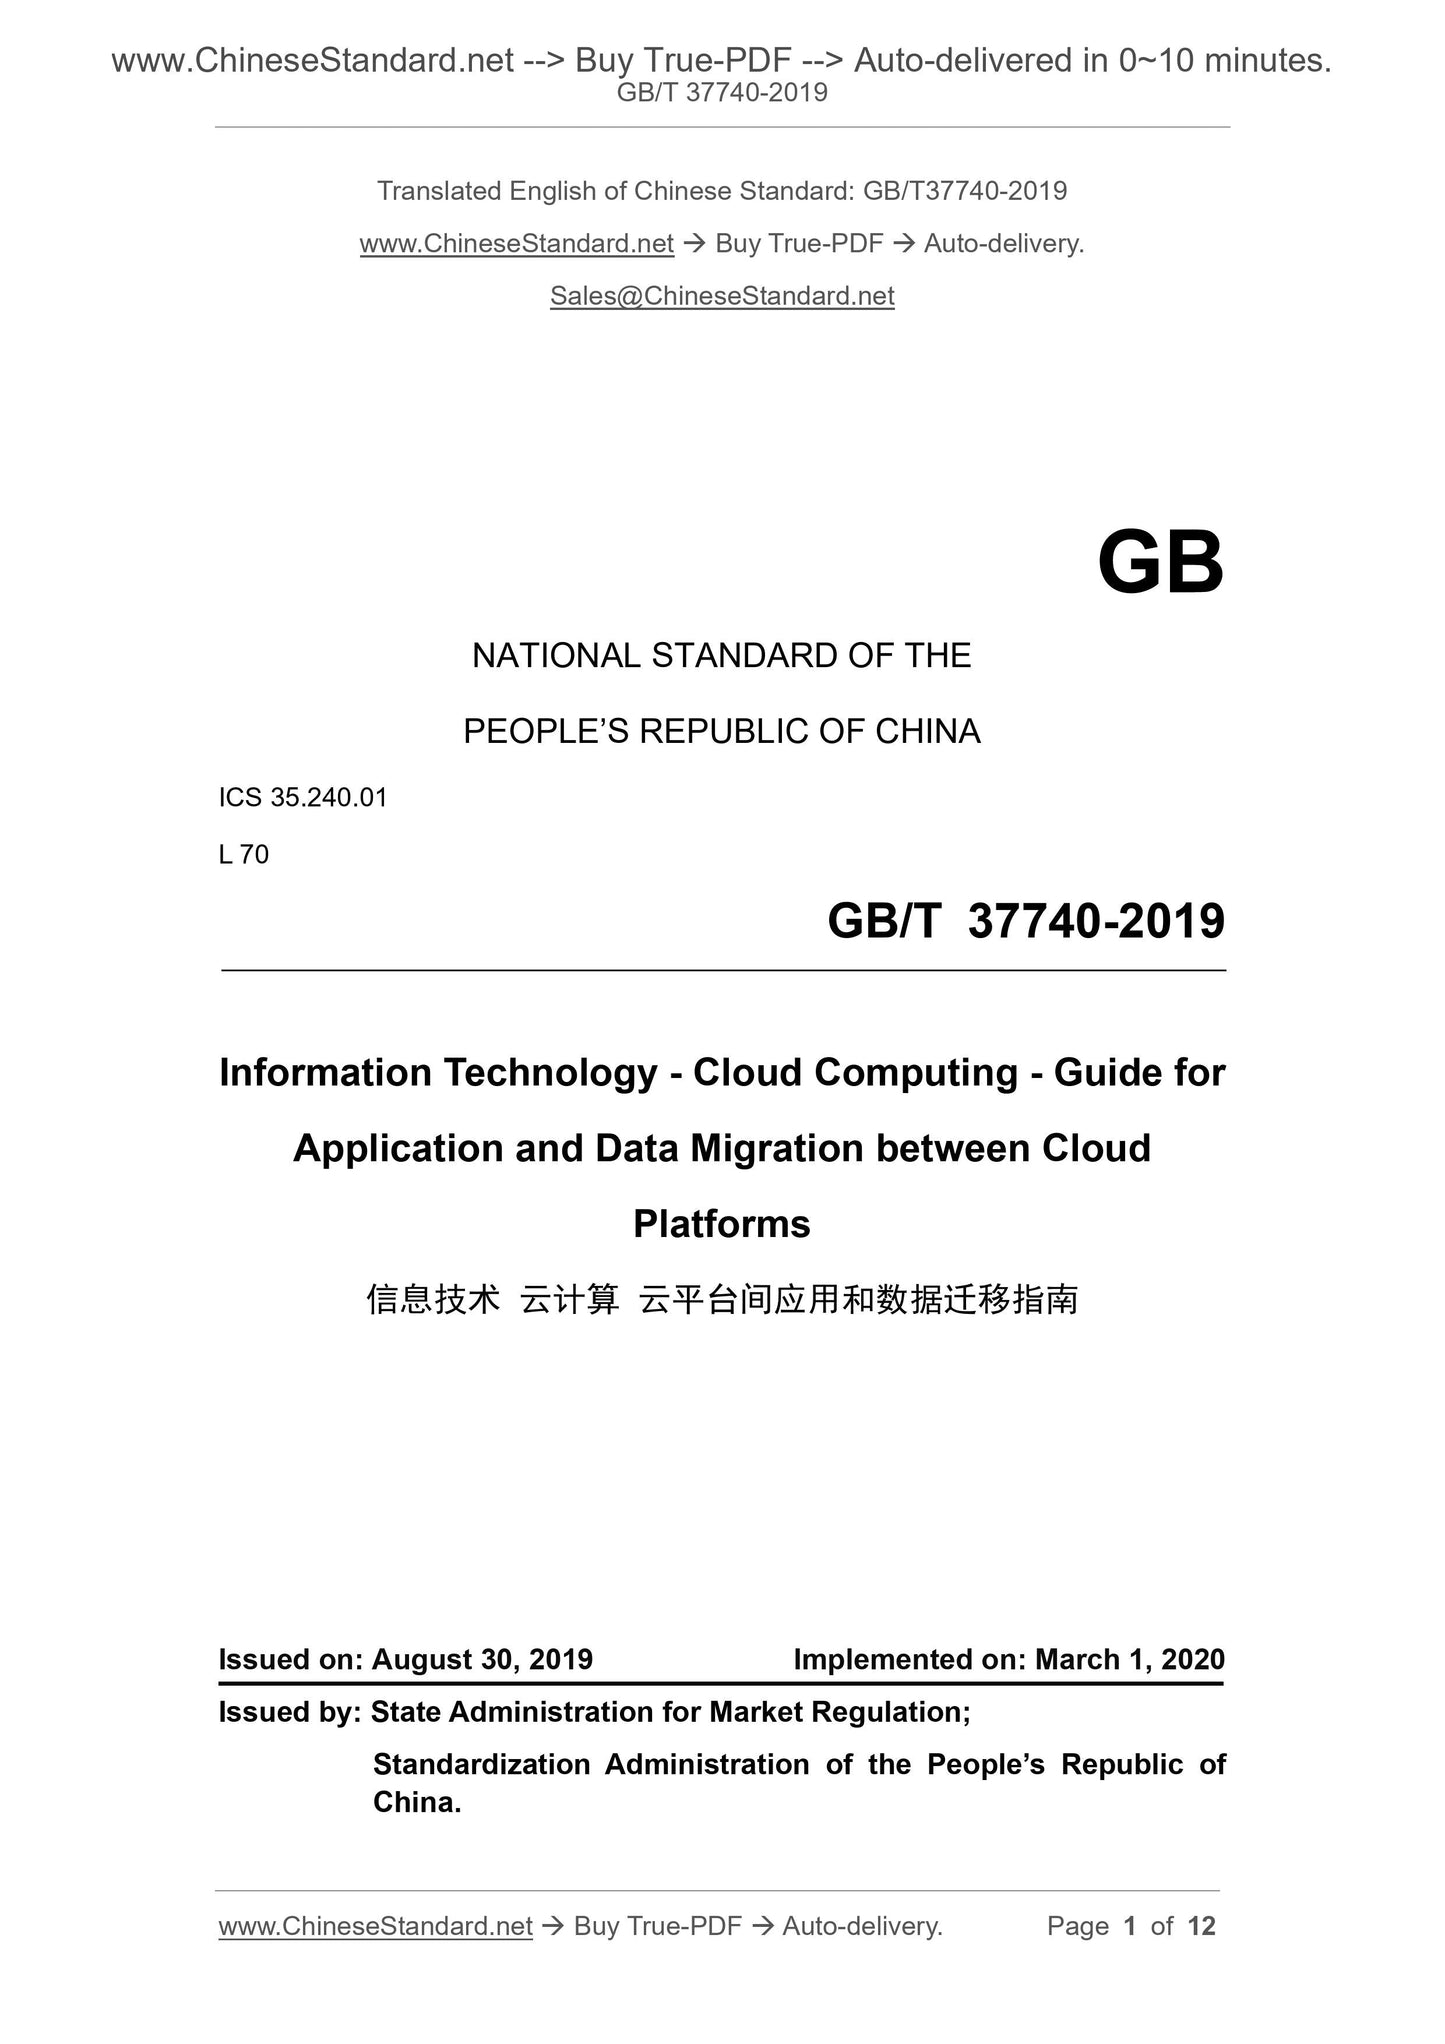 GB/T 37740-2019 Page 1